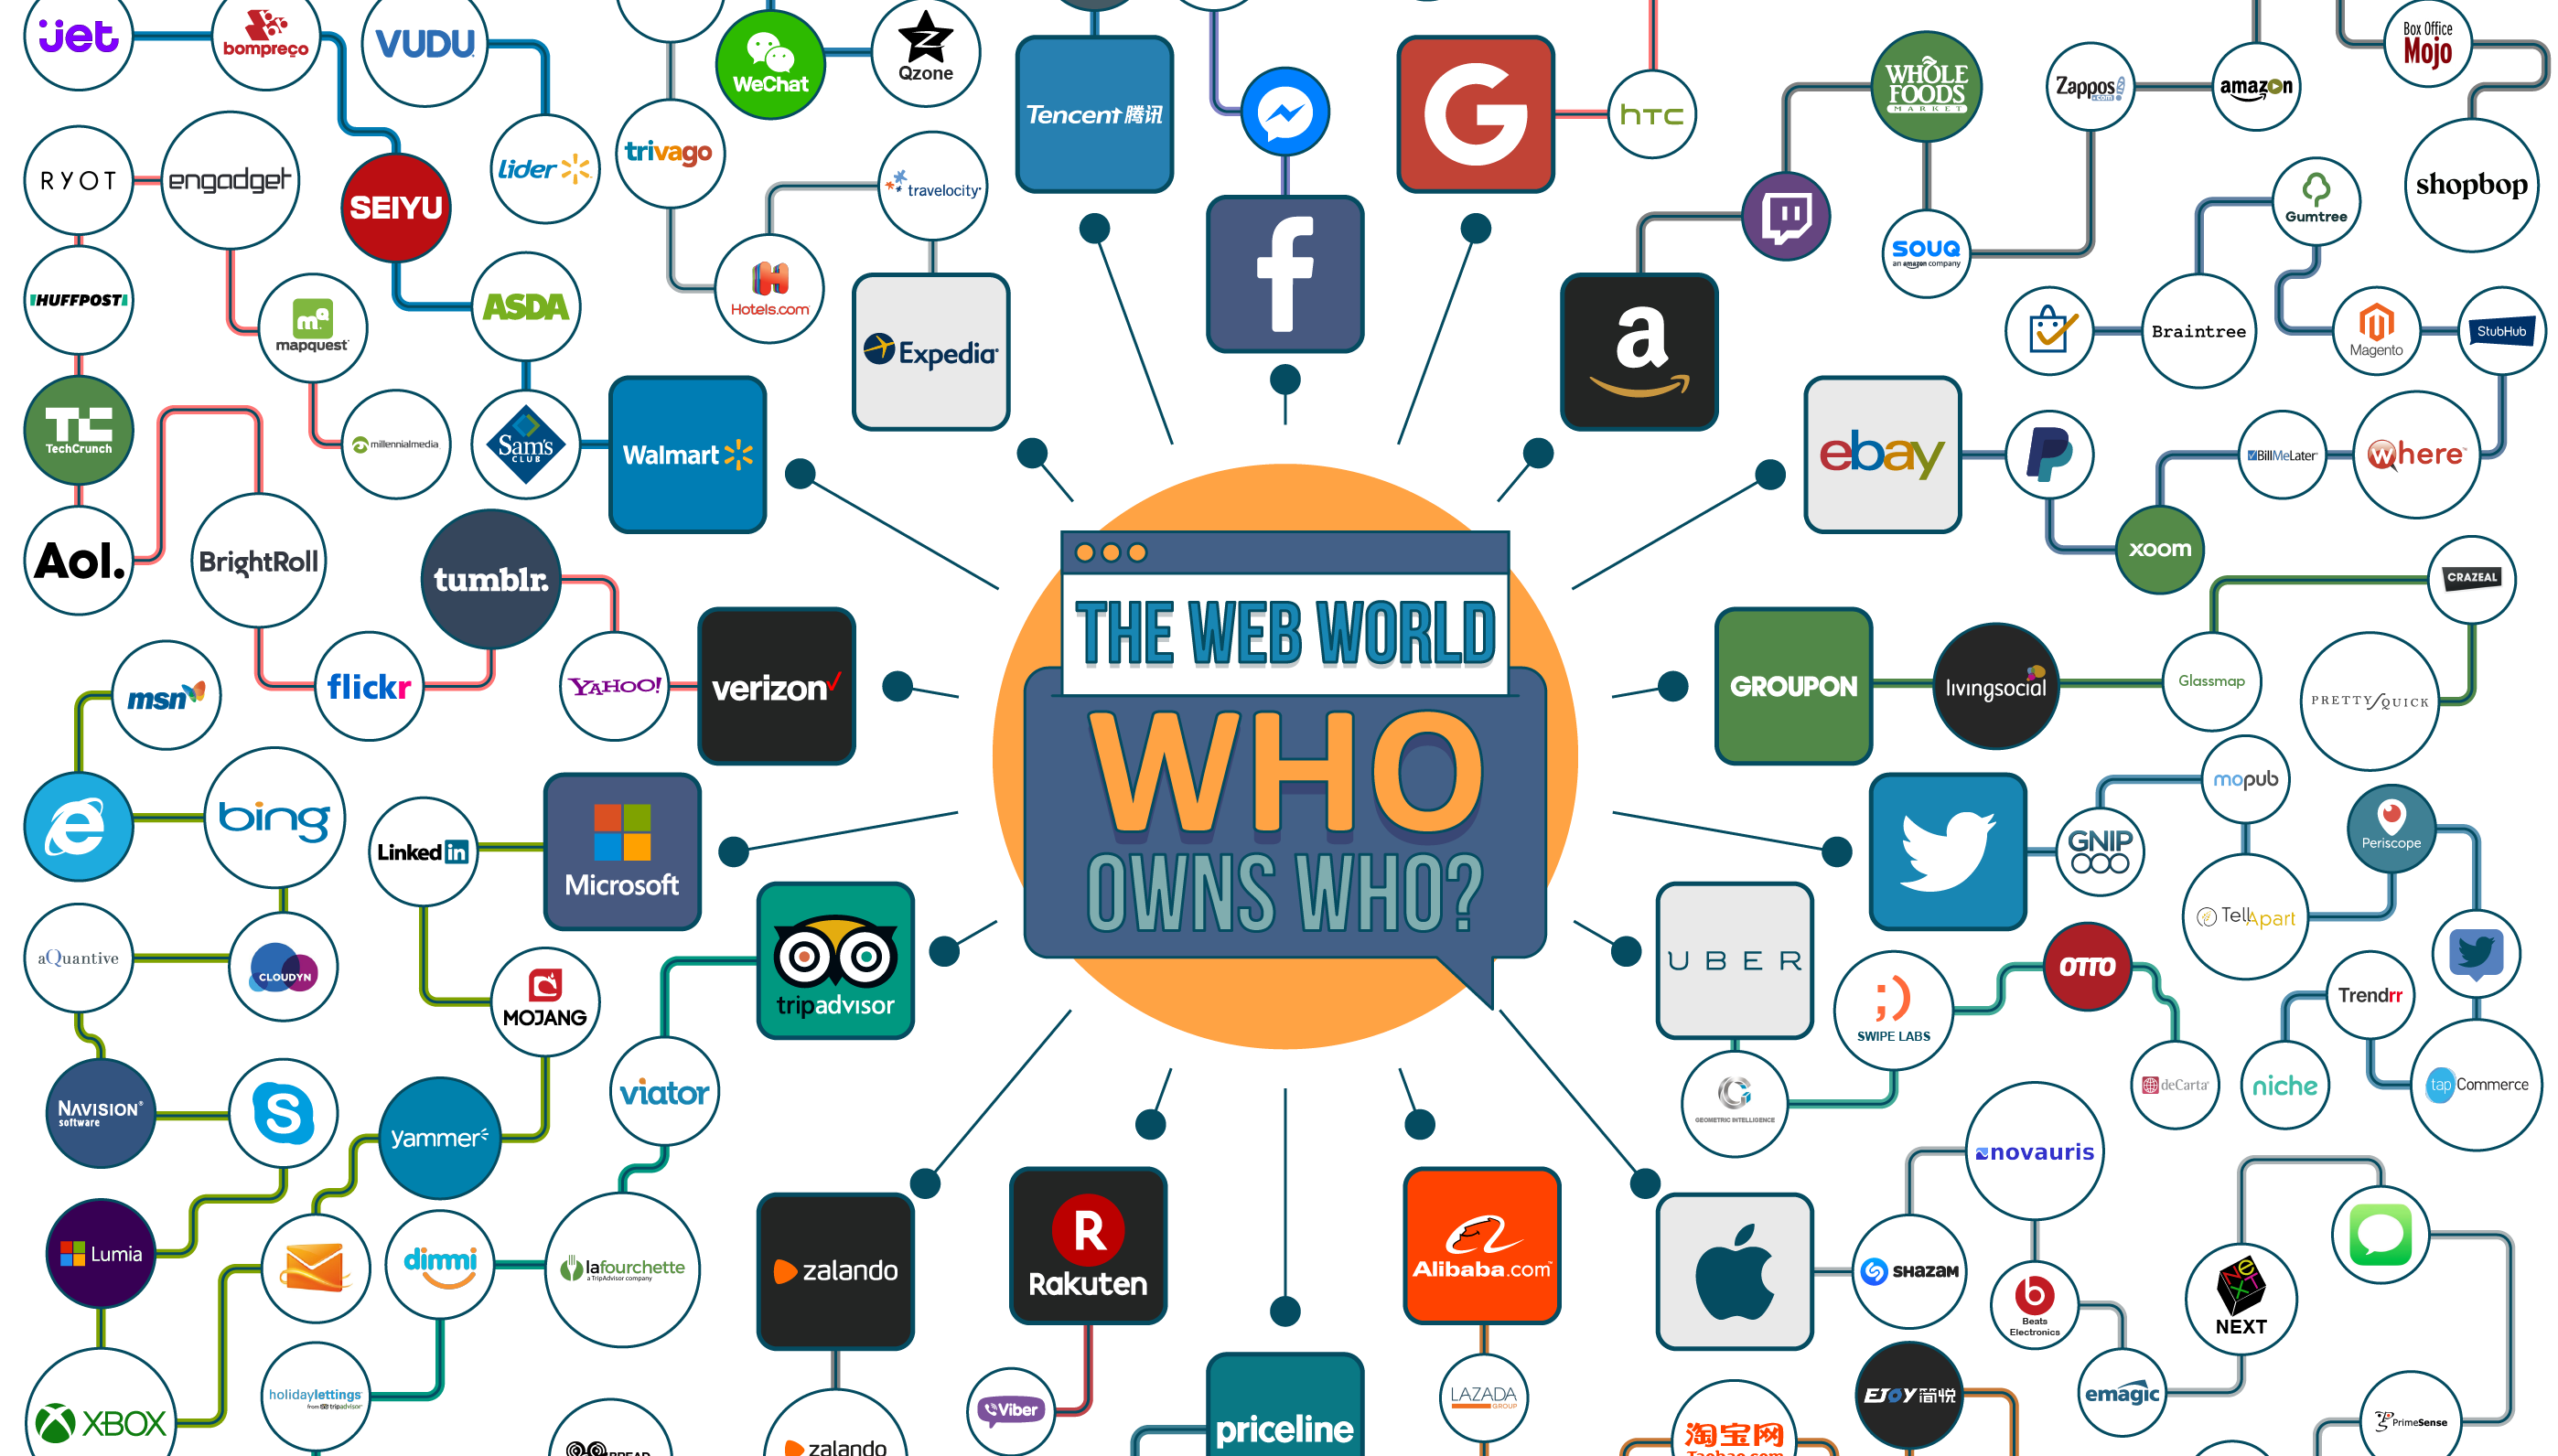 Internet Giants: Who Owns Who on the Web.